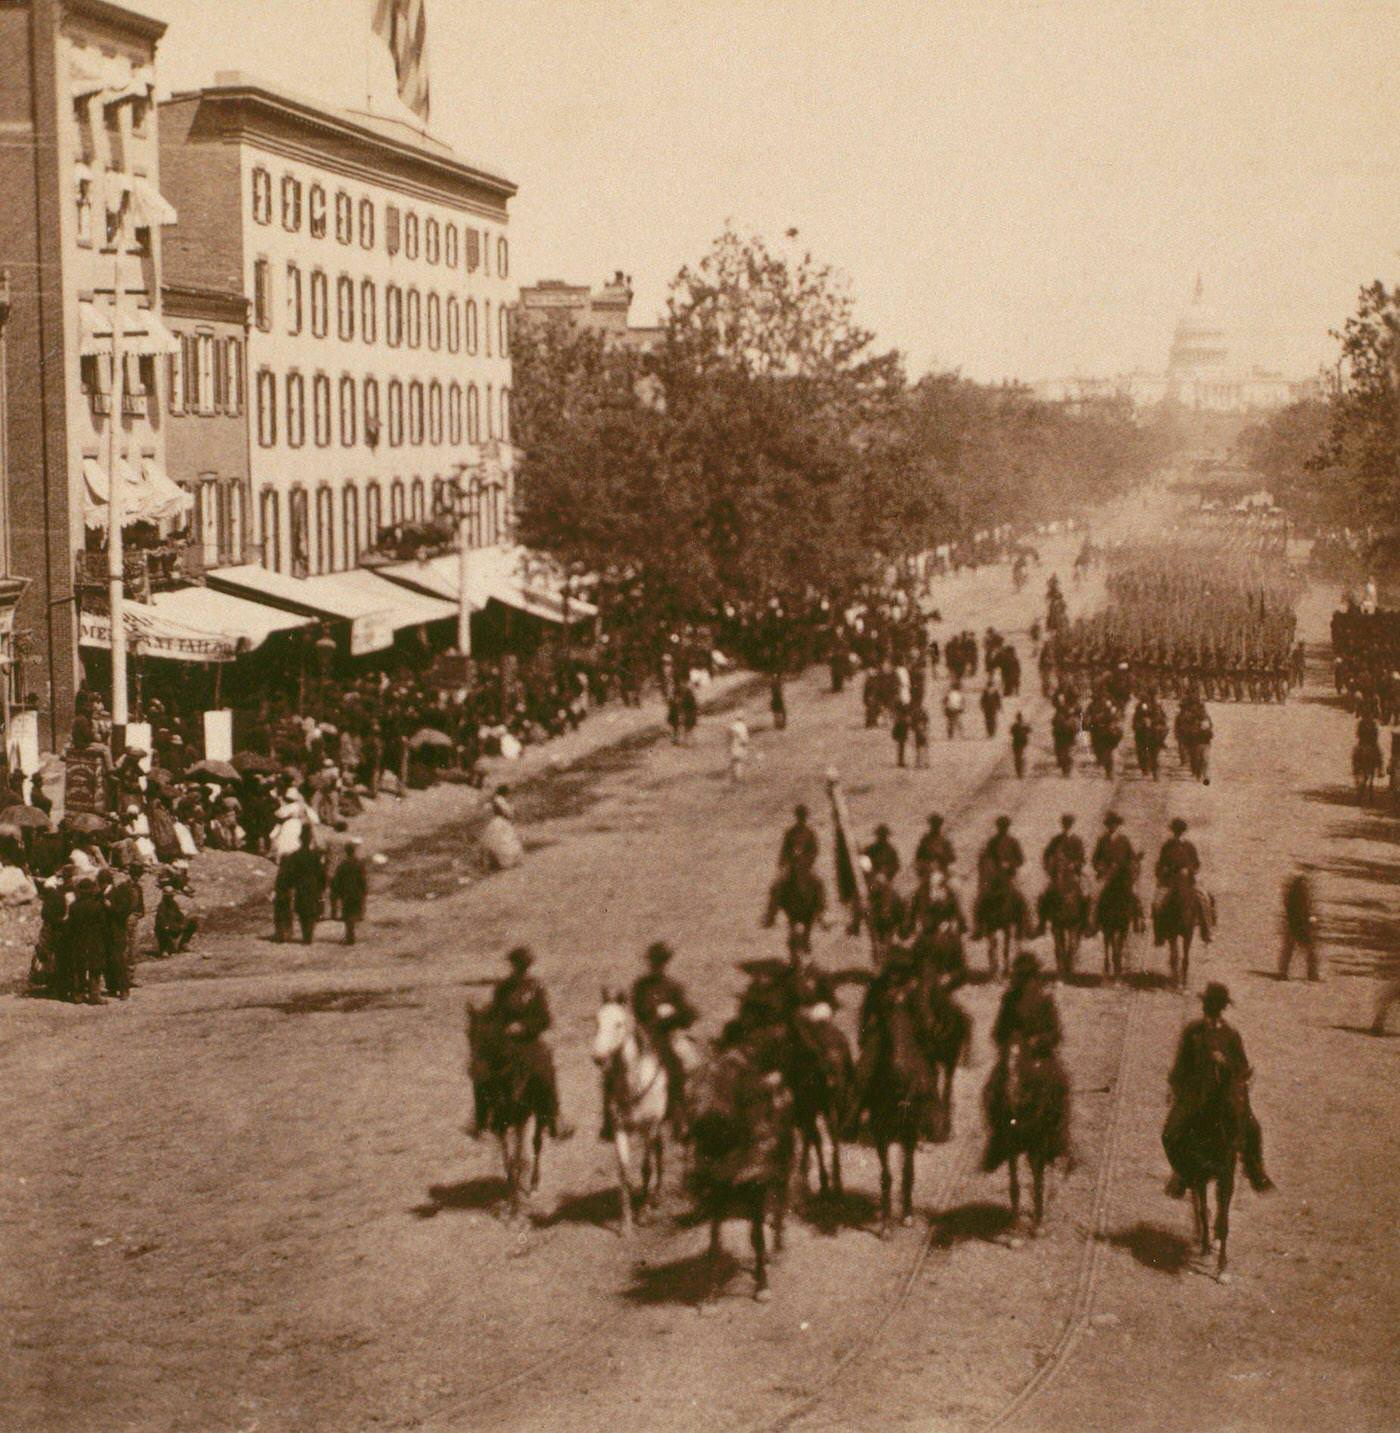 Major General A.A. Humphreys leads the Second Corps during a victory parade in Washington, D.C., on May 23, 1865.